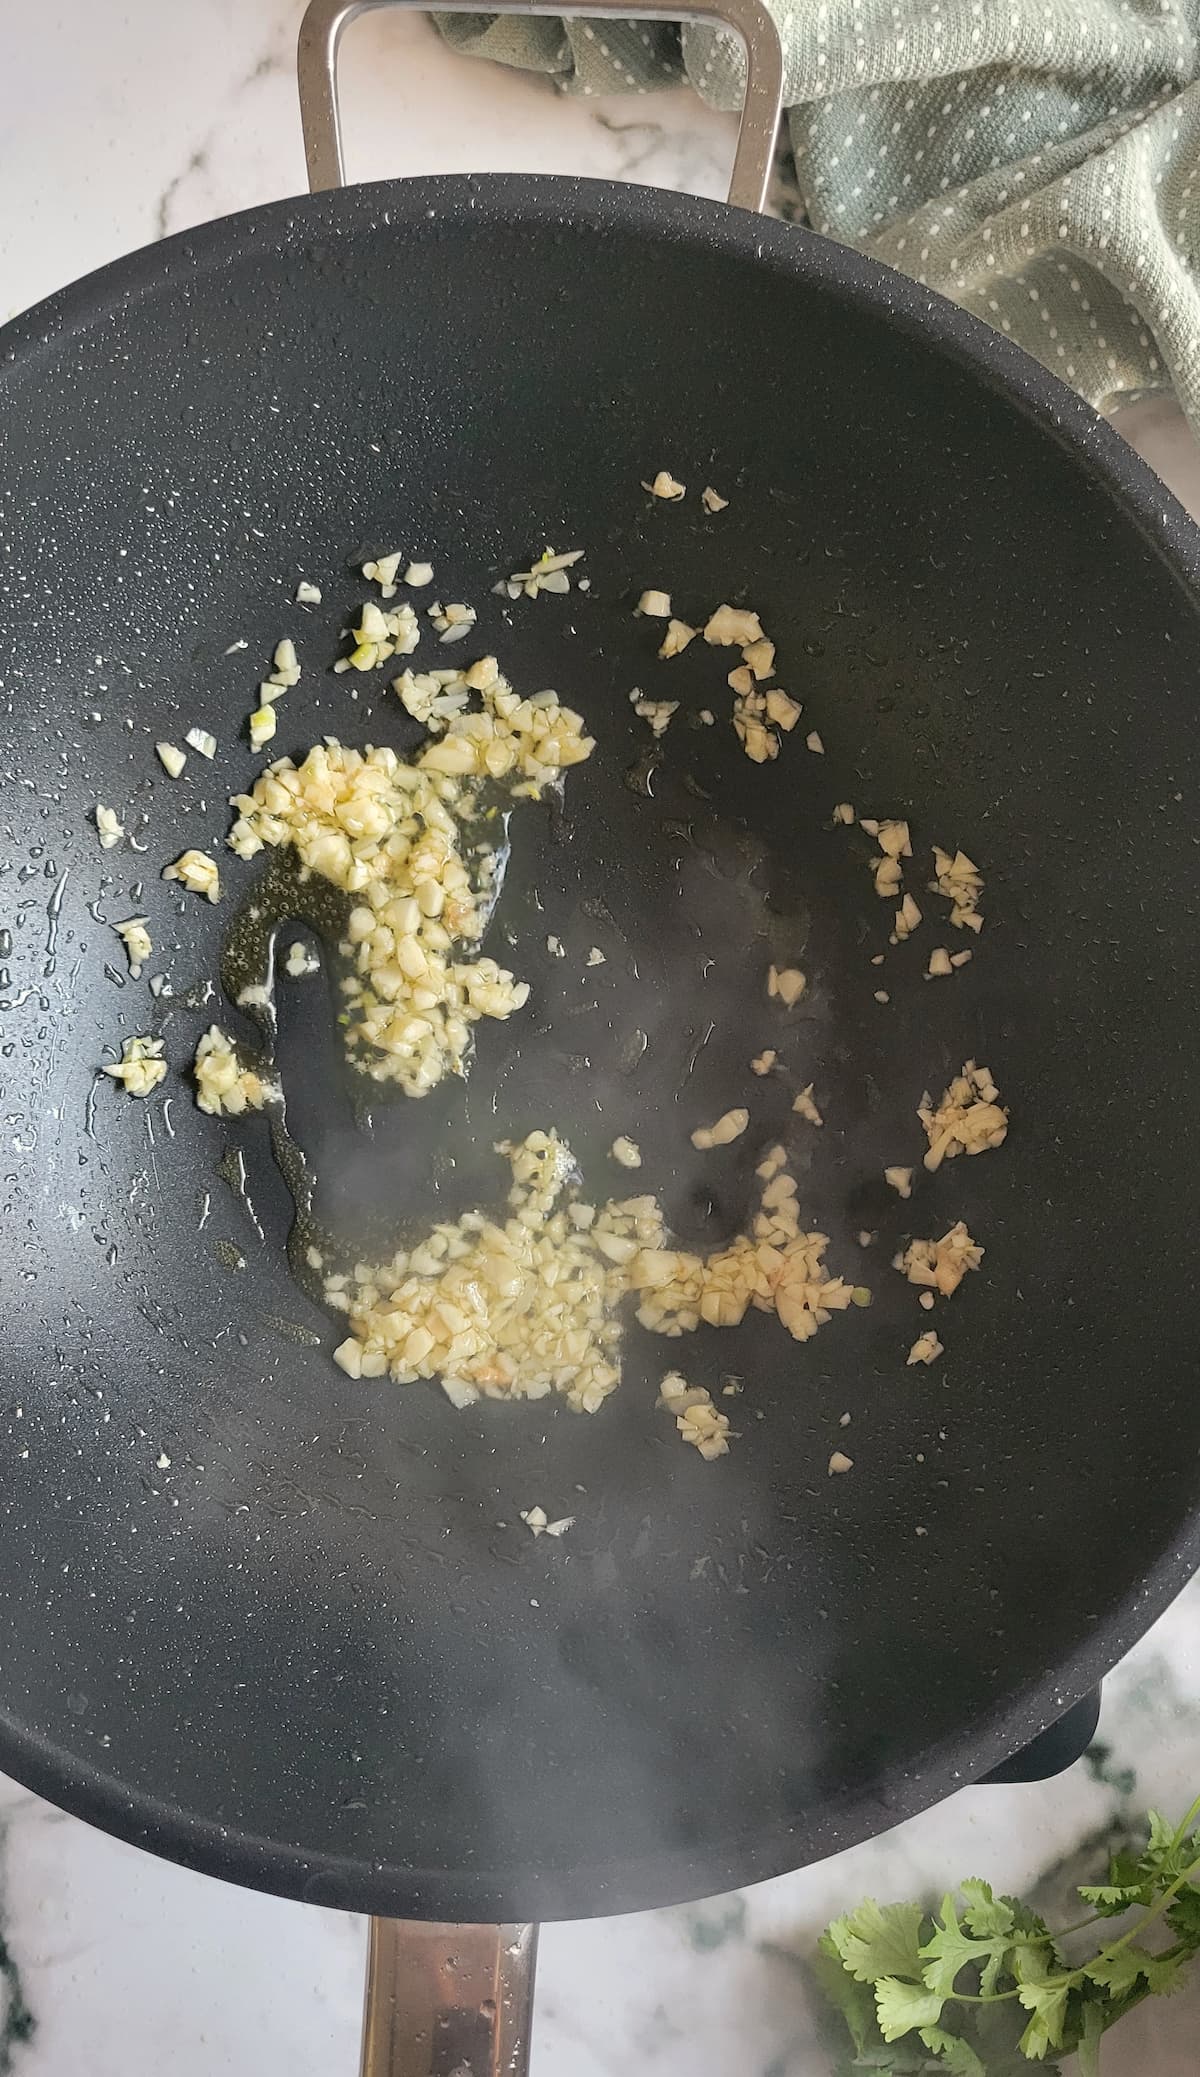 minced garlic cooking in oil in a wok